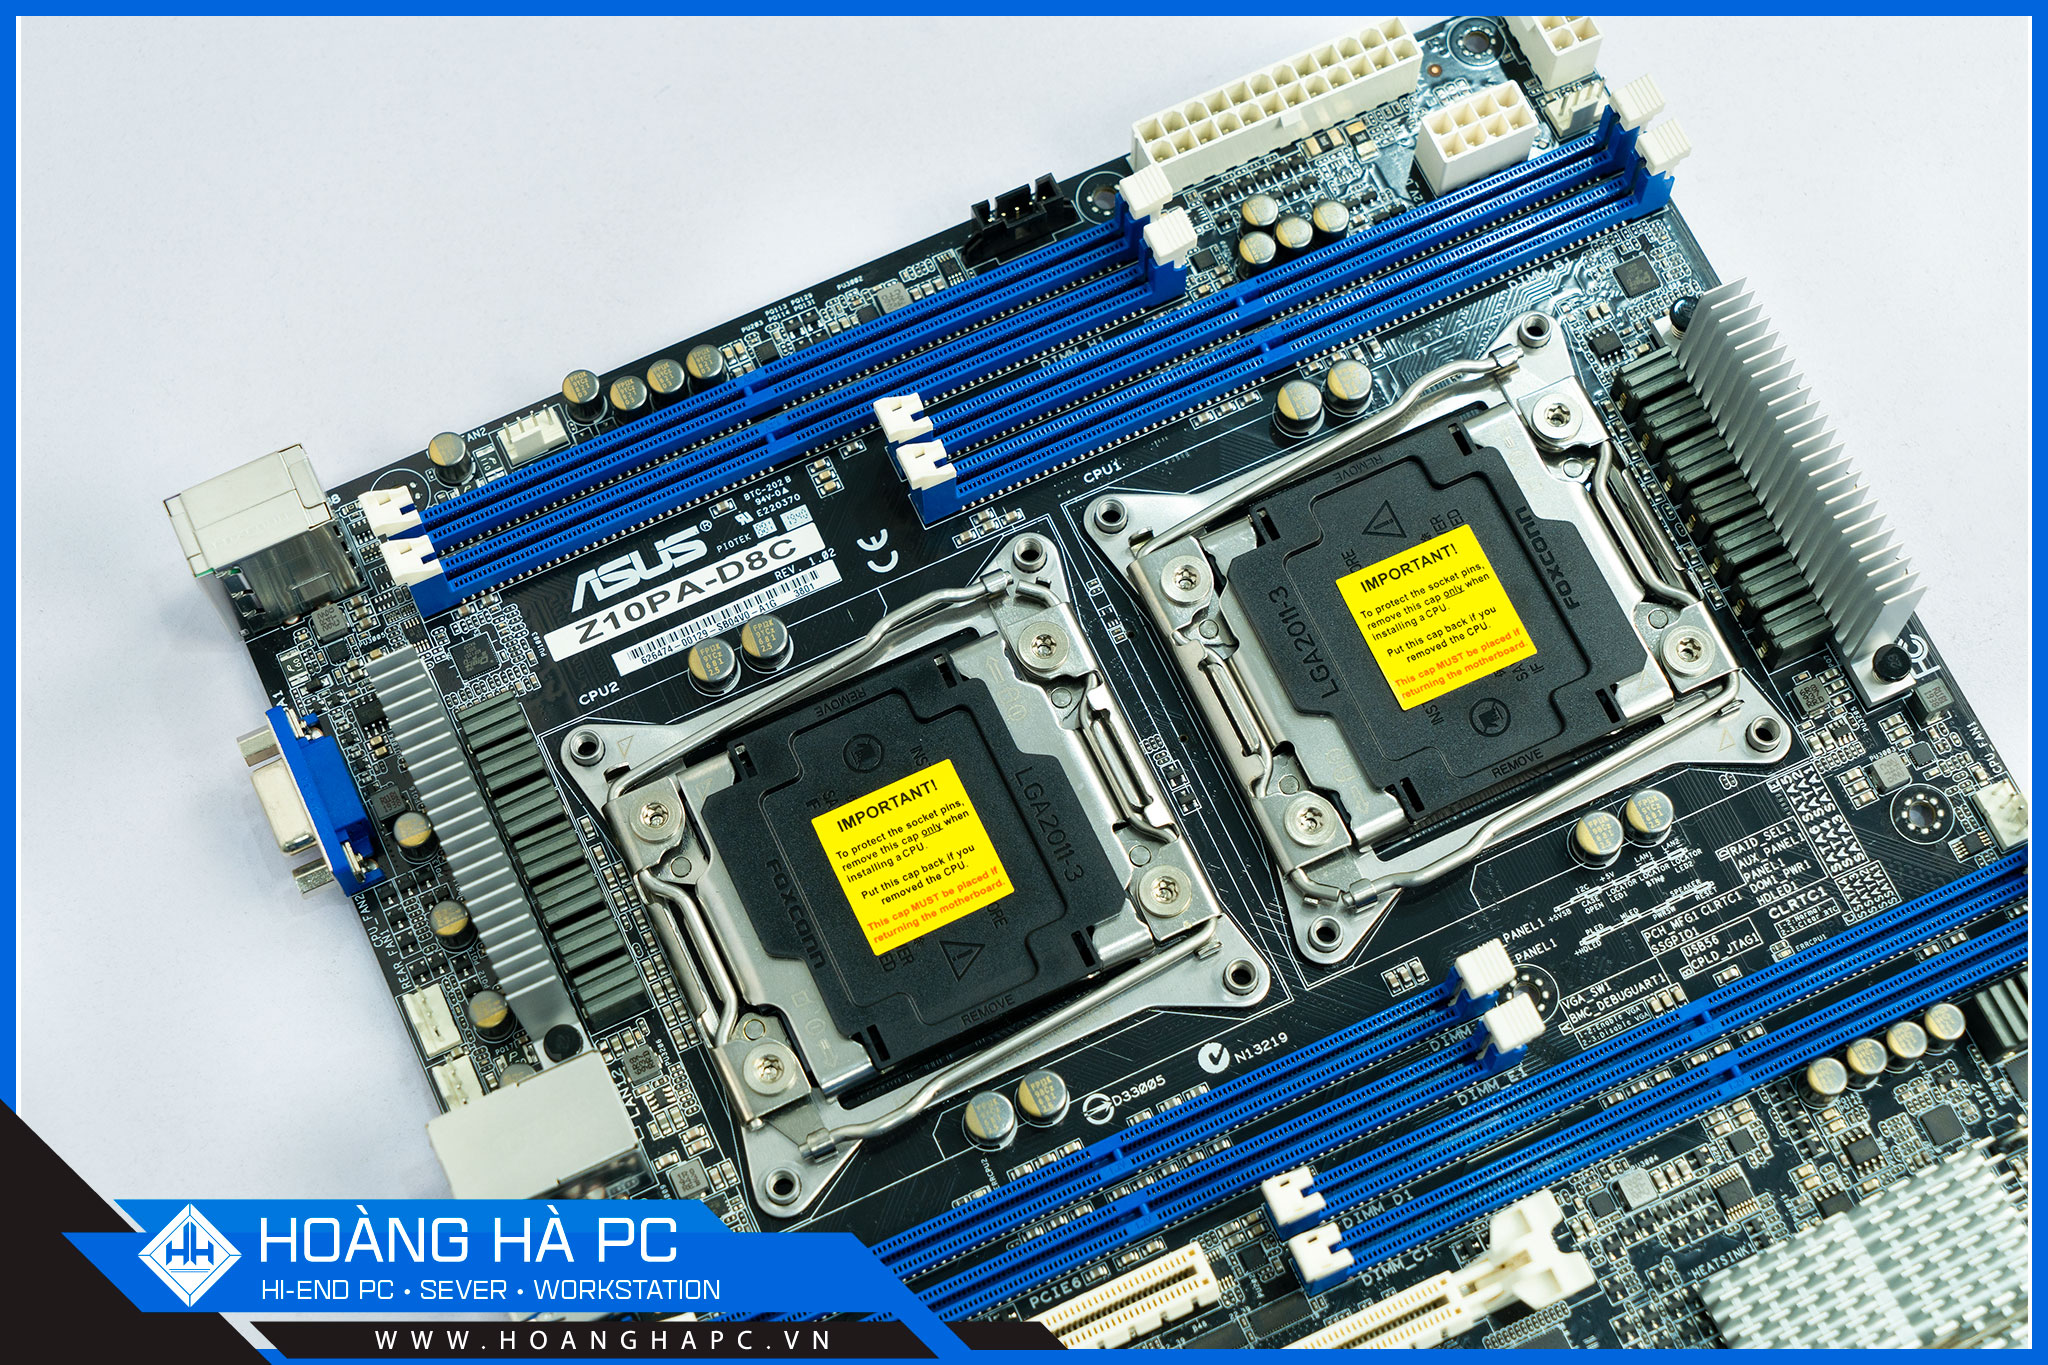 MAINBOARD ASUS Z10PA-D8C